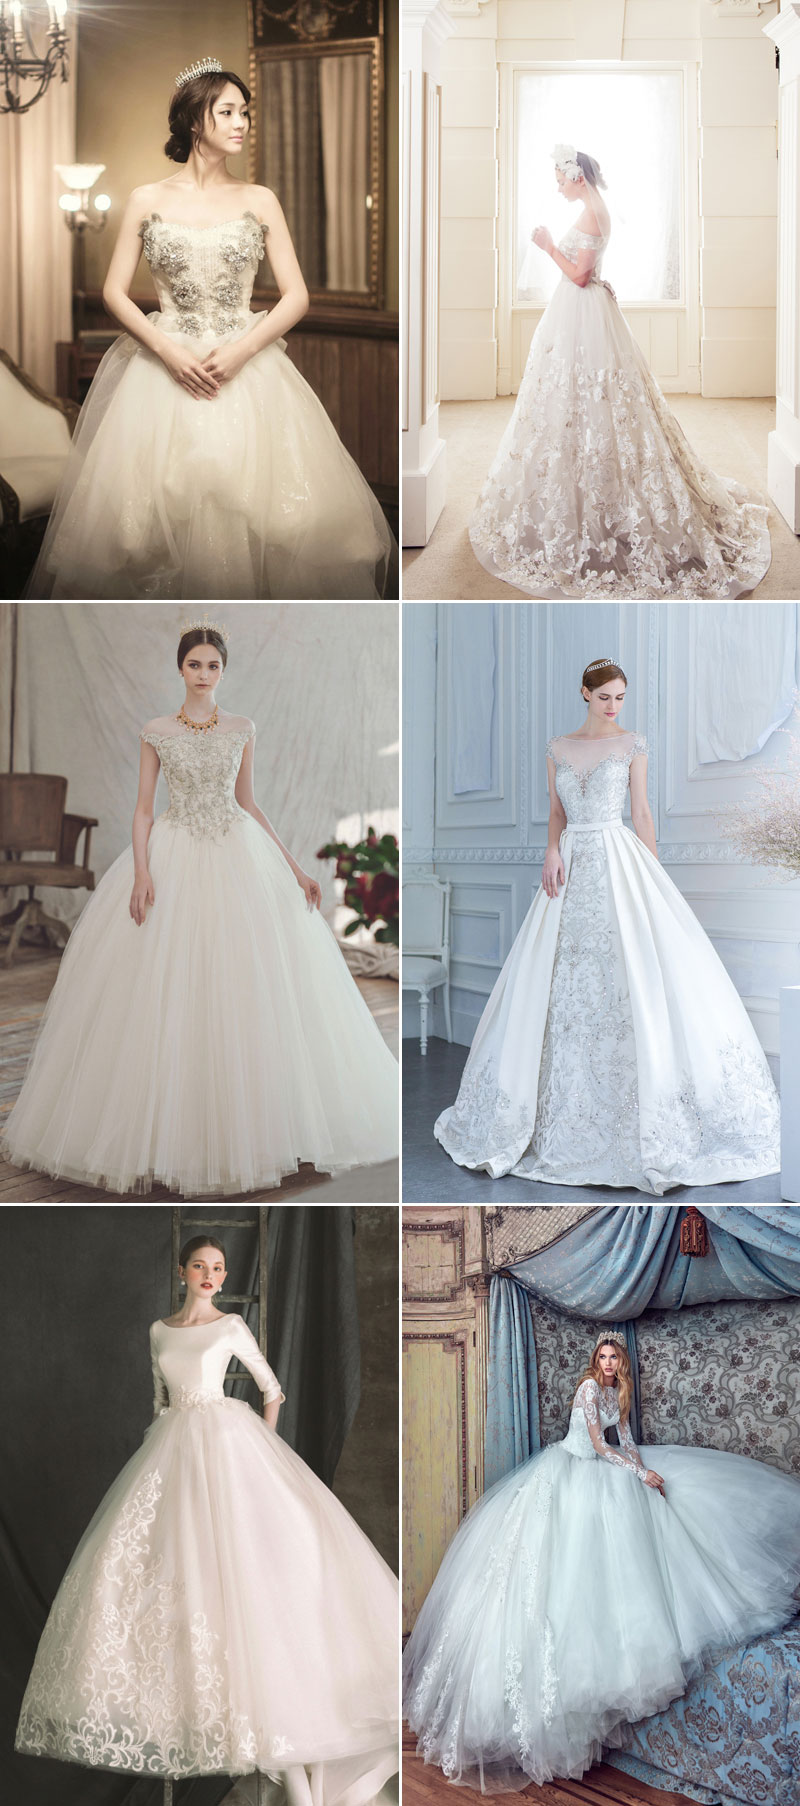 gowns of elegance